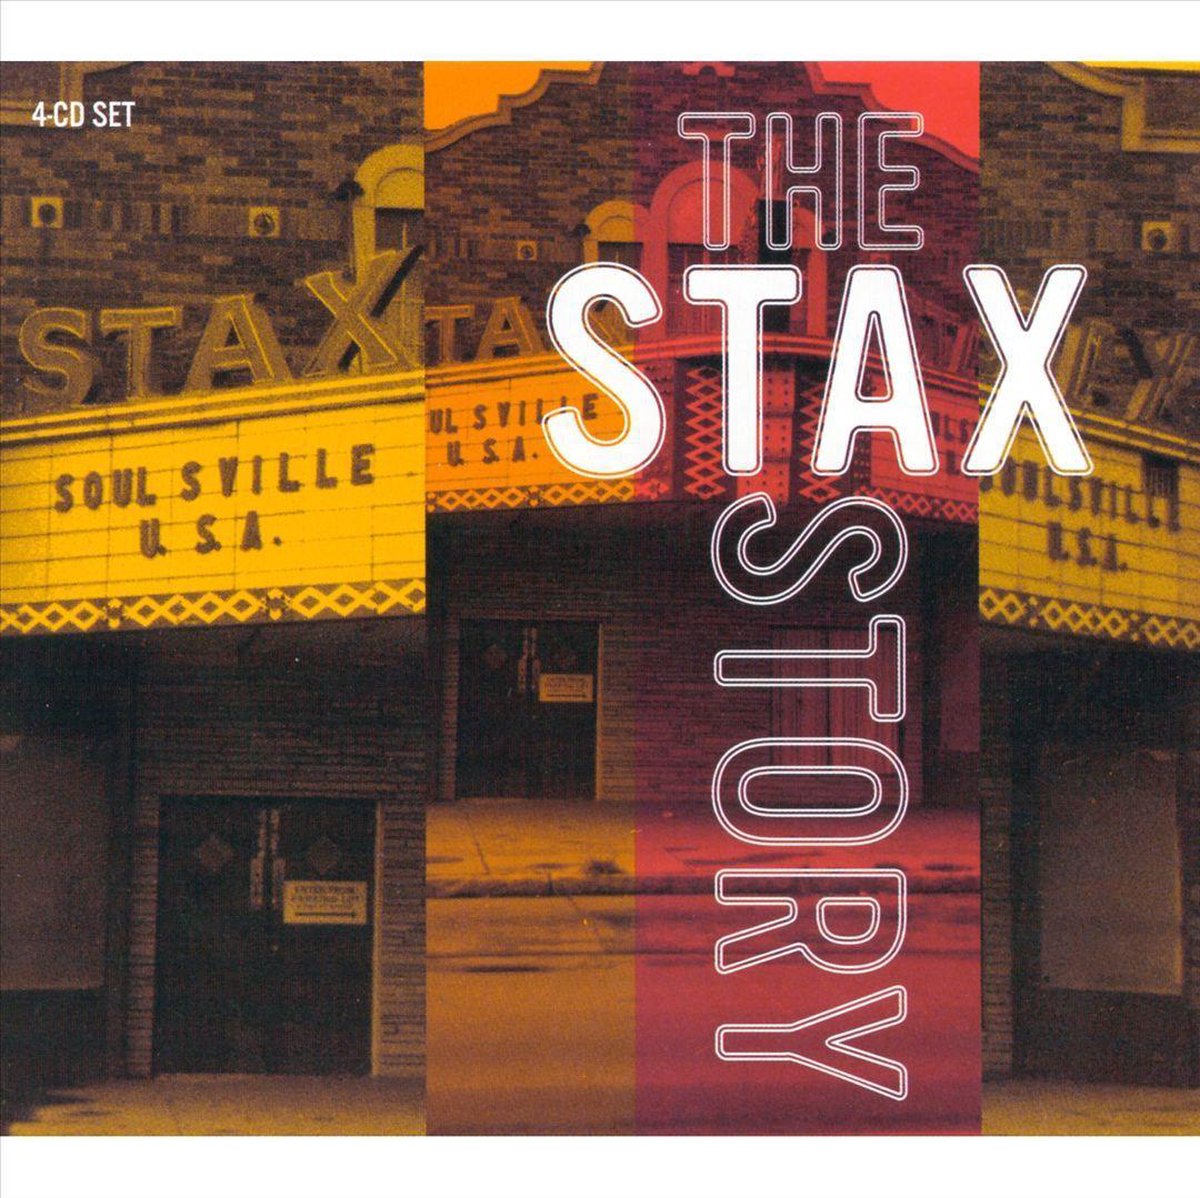 Stax Story - various artists